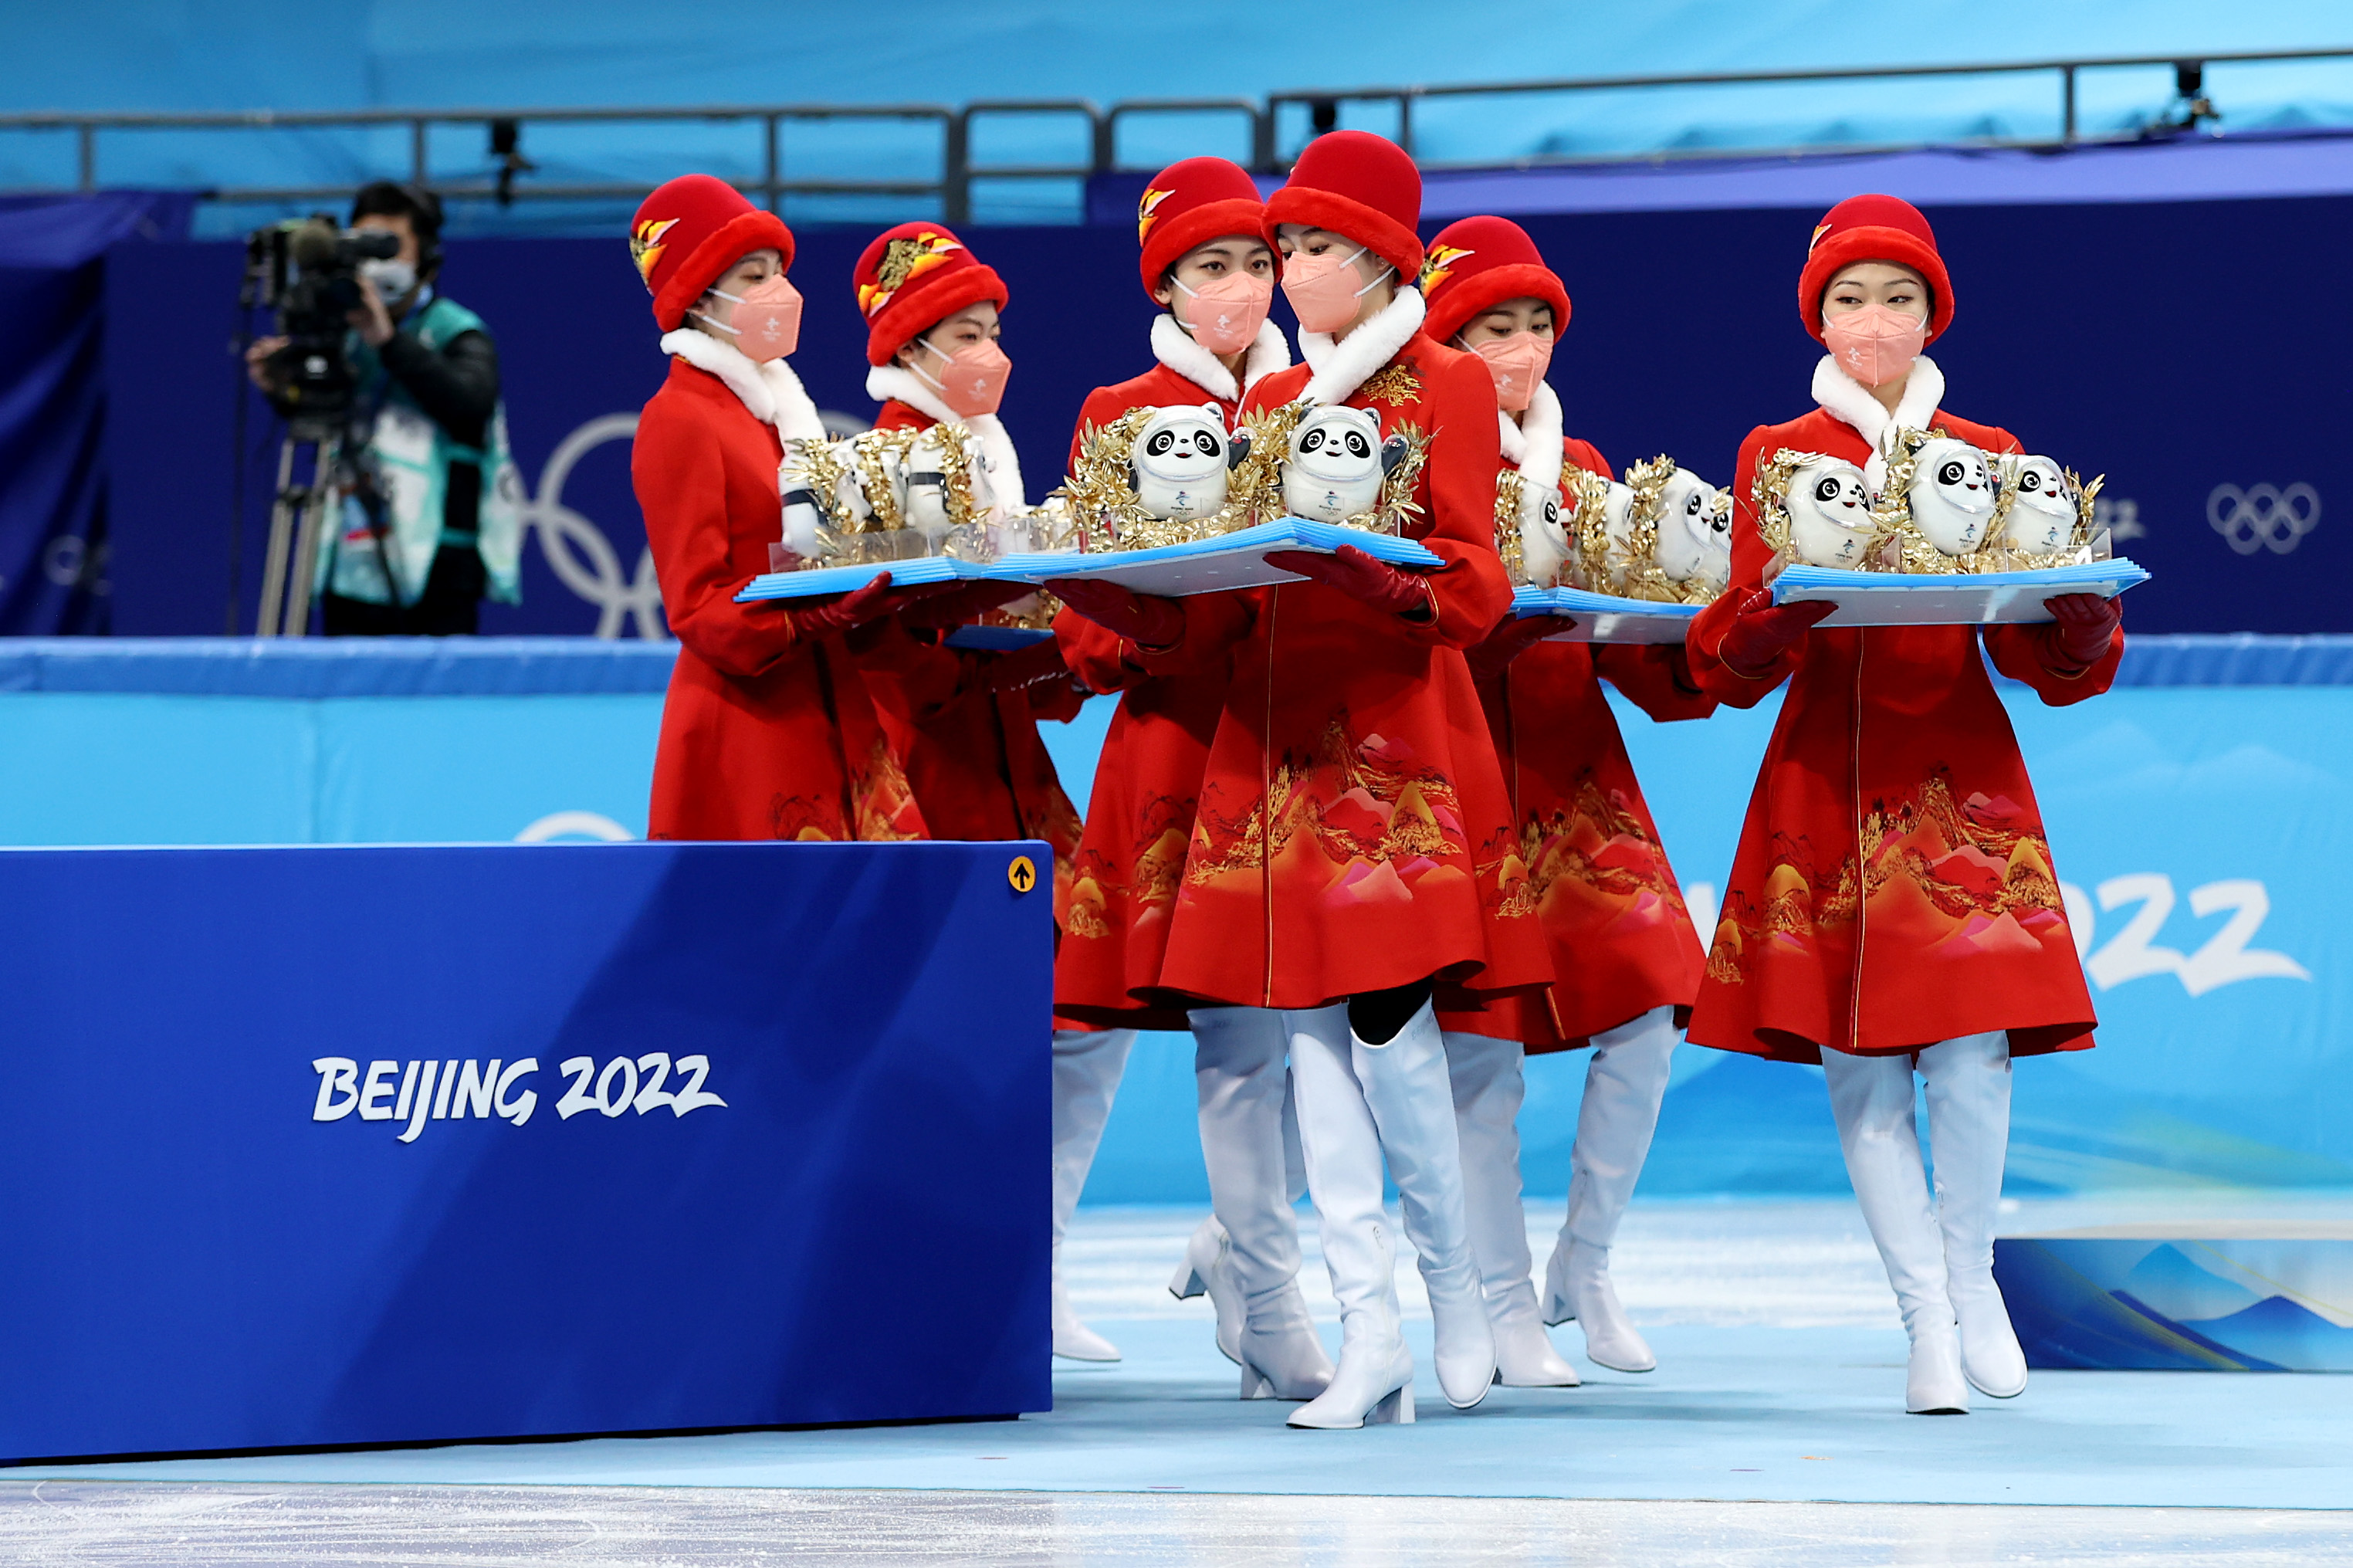 Games staff prepare to give Beijing 2022 mascots to medal winners.